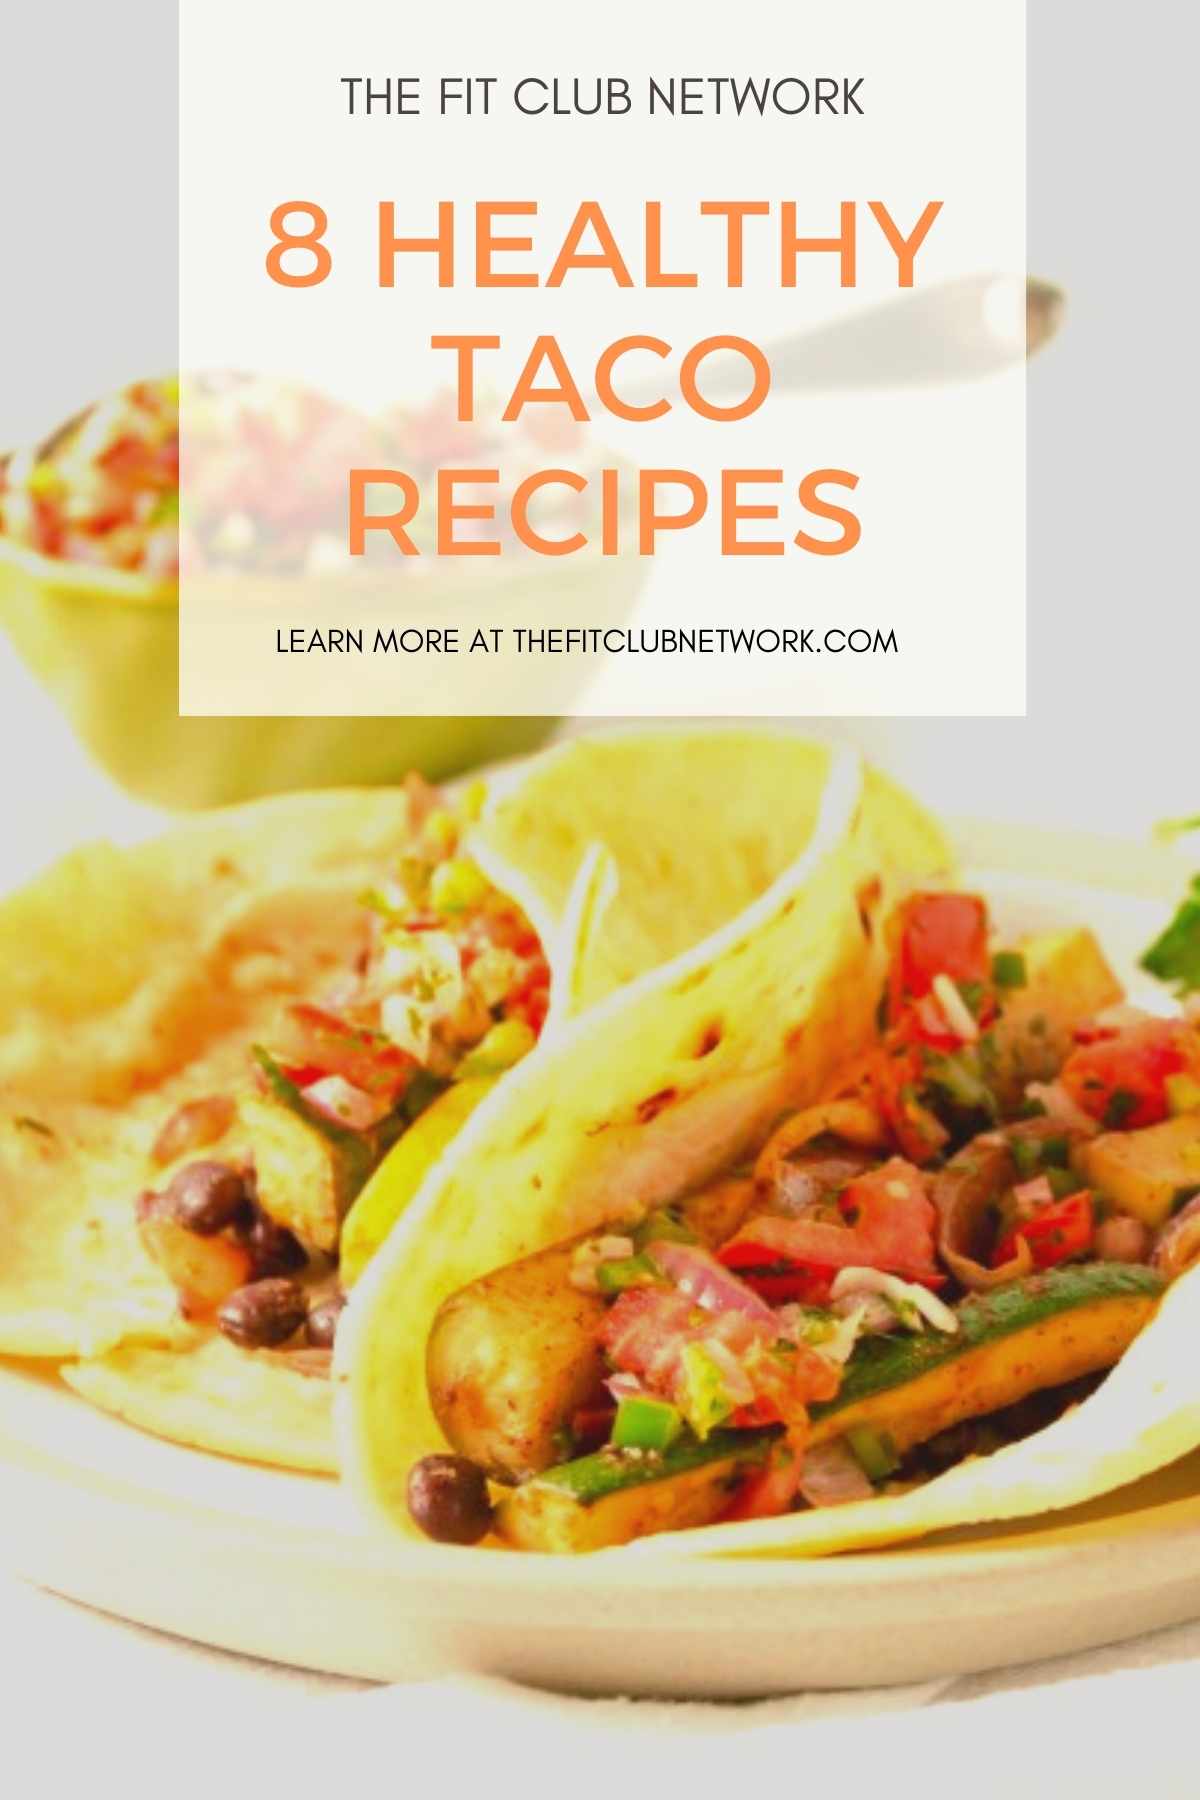 8 Healthy Taco Recipes & Buffet Style Meal Prep | THEFITCLUBNETWORK.COM